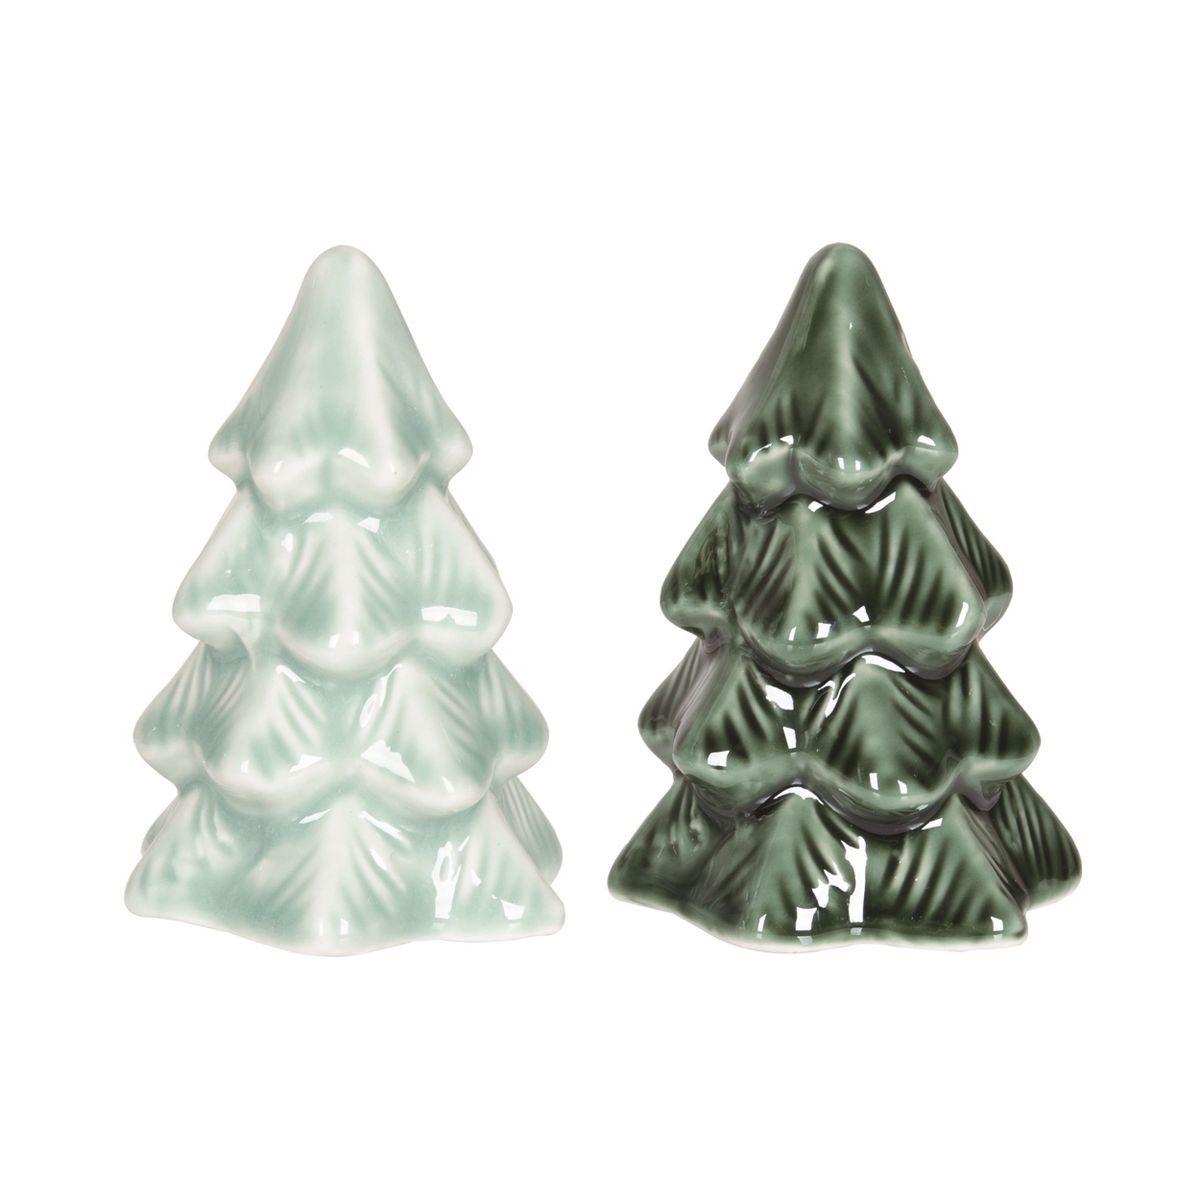 Transpac Ceramic 4.2 in. Multicolor Christmas Iridescent Salt and Pepper Shakers Set of 2 | Target